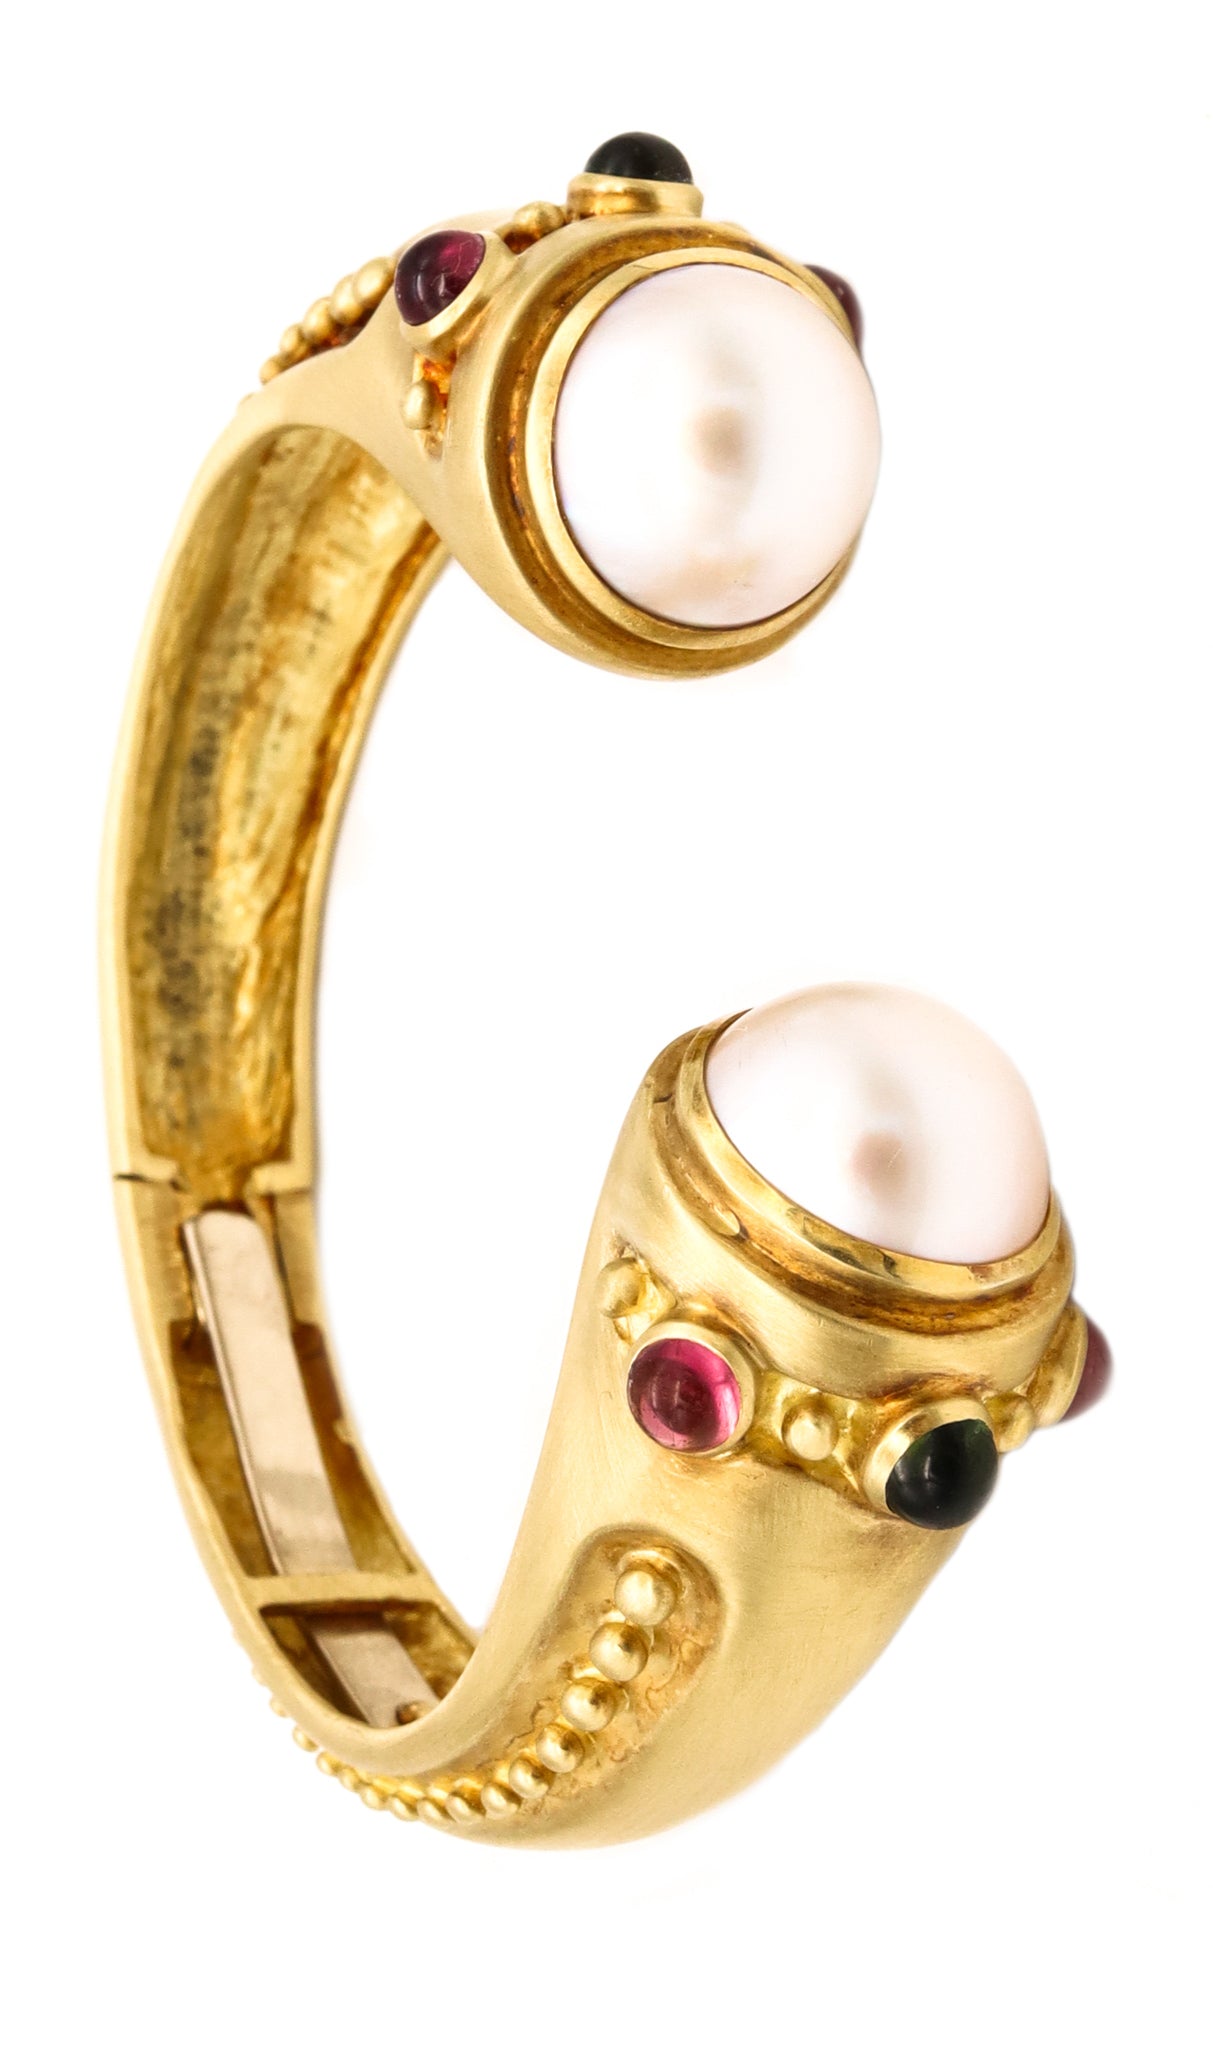 Marlene Stowe Cuff Bracelet In 18Kt Brushed Gold With Mabe Pearls And Tourmalines